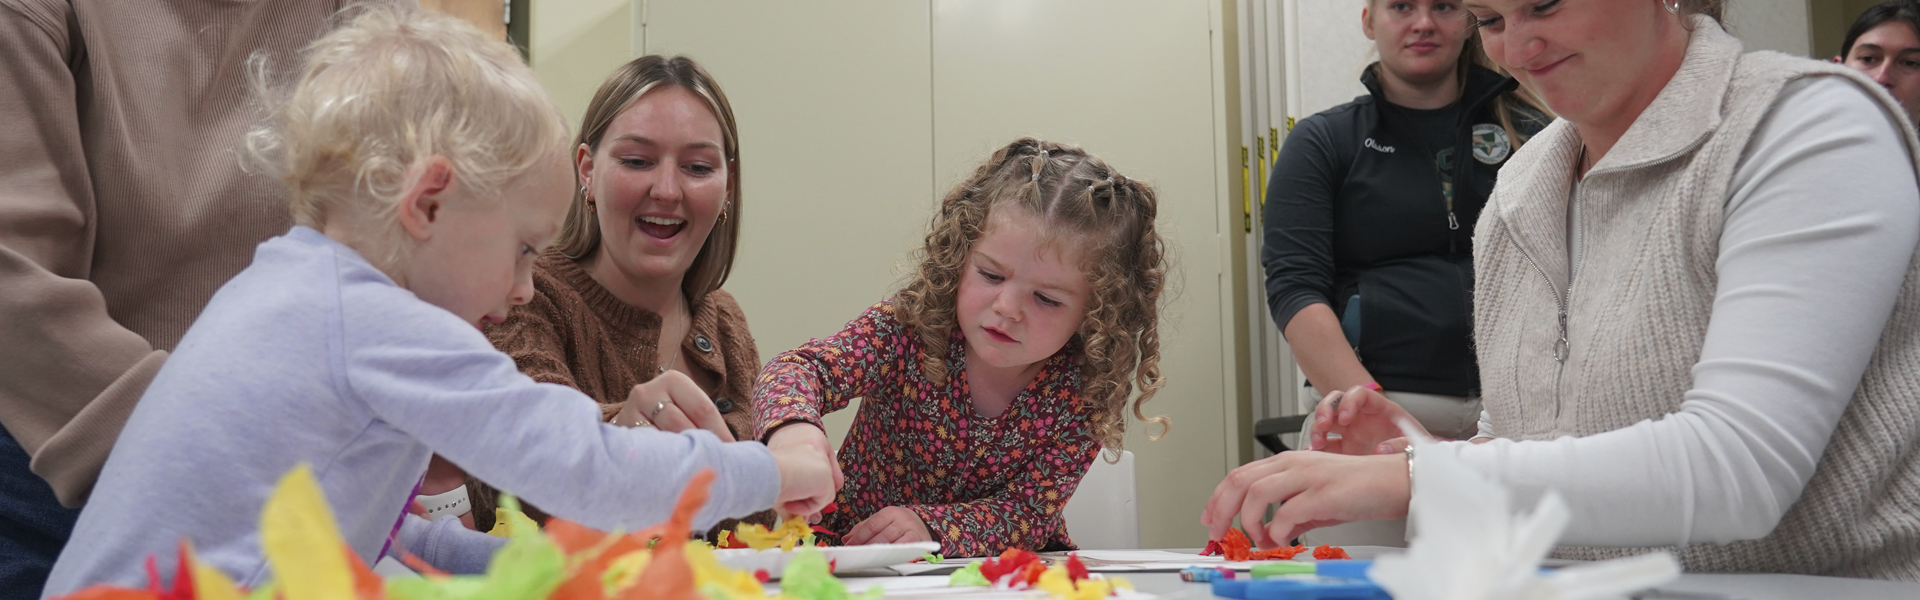 Occupational Therapy students work with children in a classroom setting